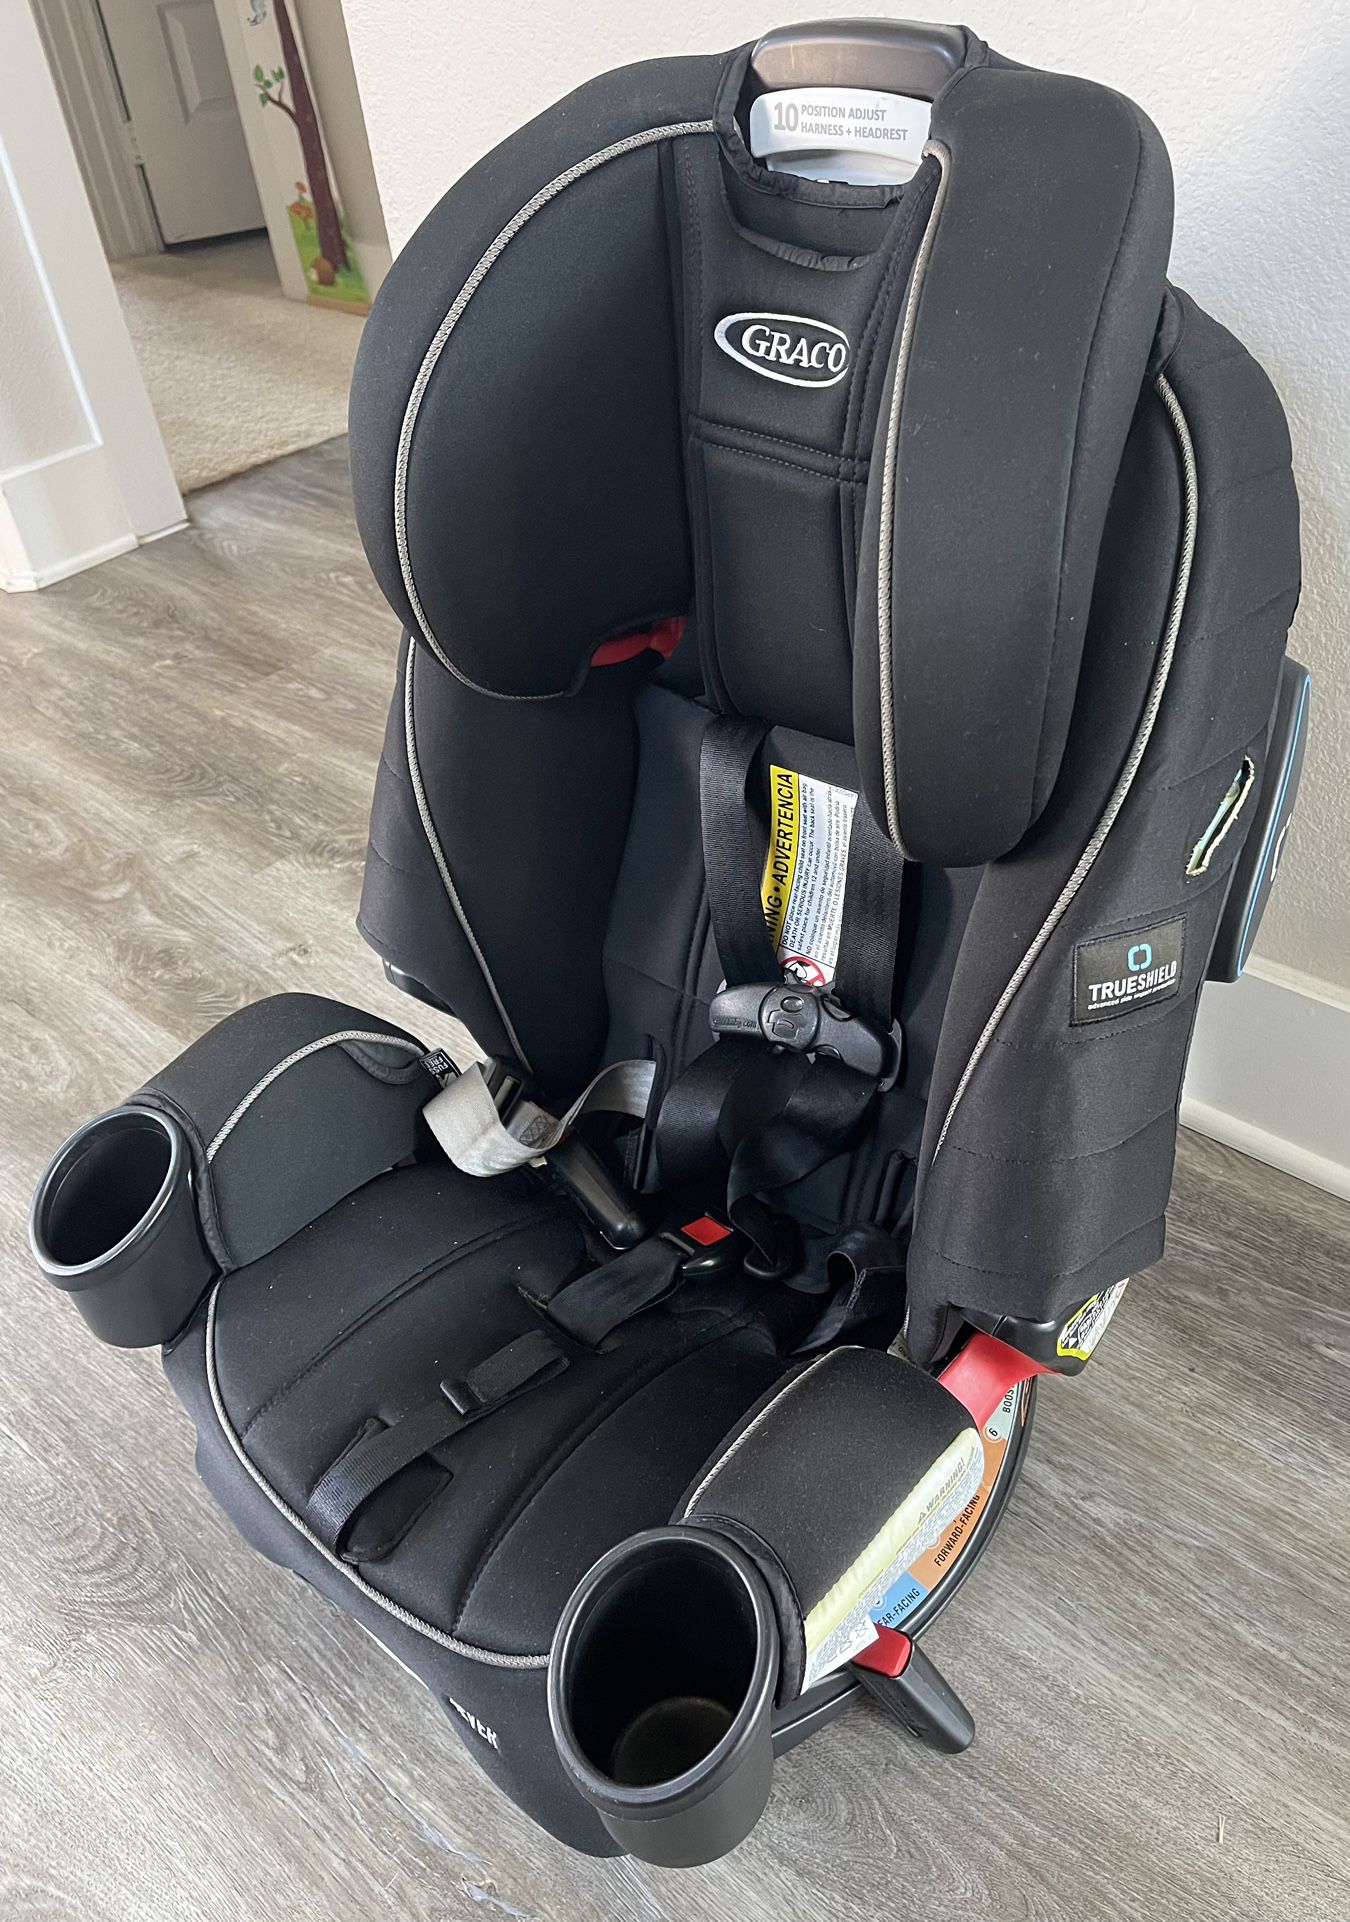 Graco 4Ever 4 in 1 Car Seat featuring TrueShield Side Impact Technology 